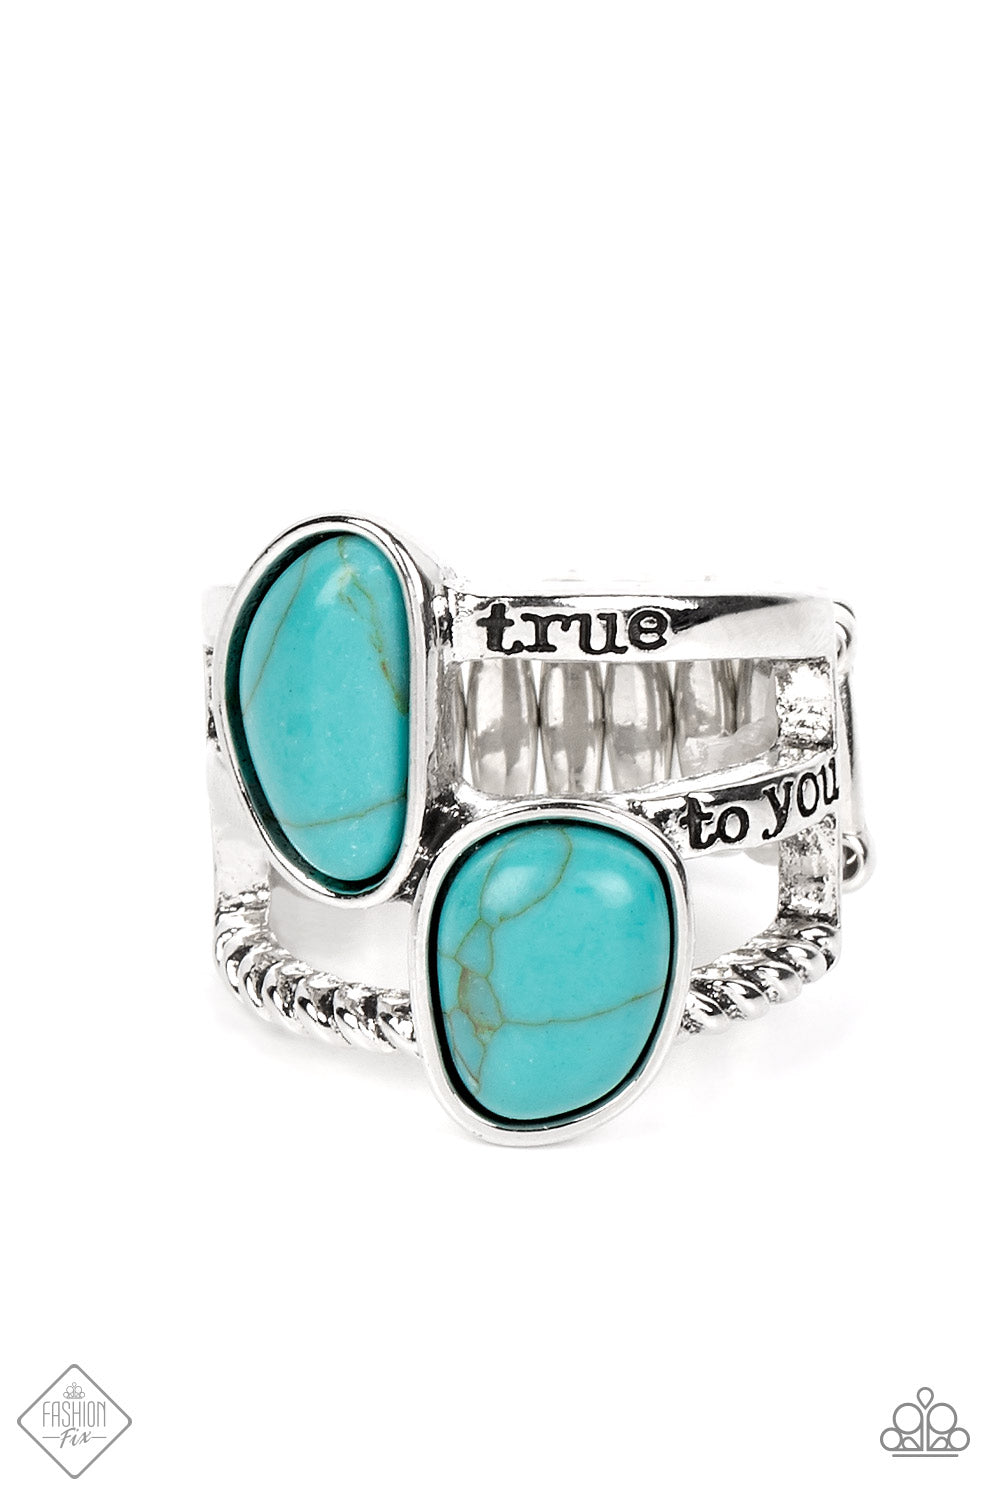 True to You - Blue (Turquoise) Ring (SSF-0822)